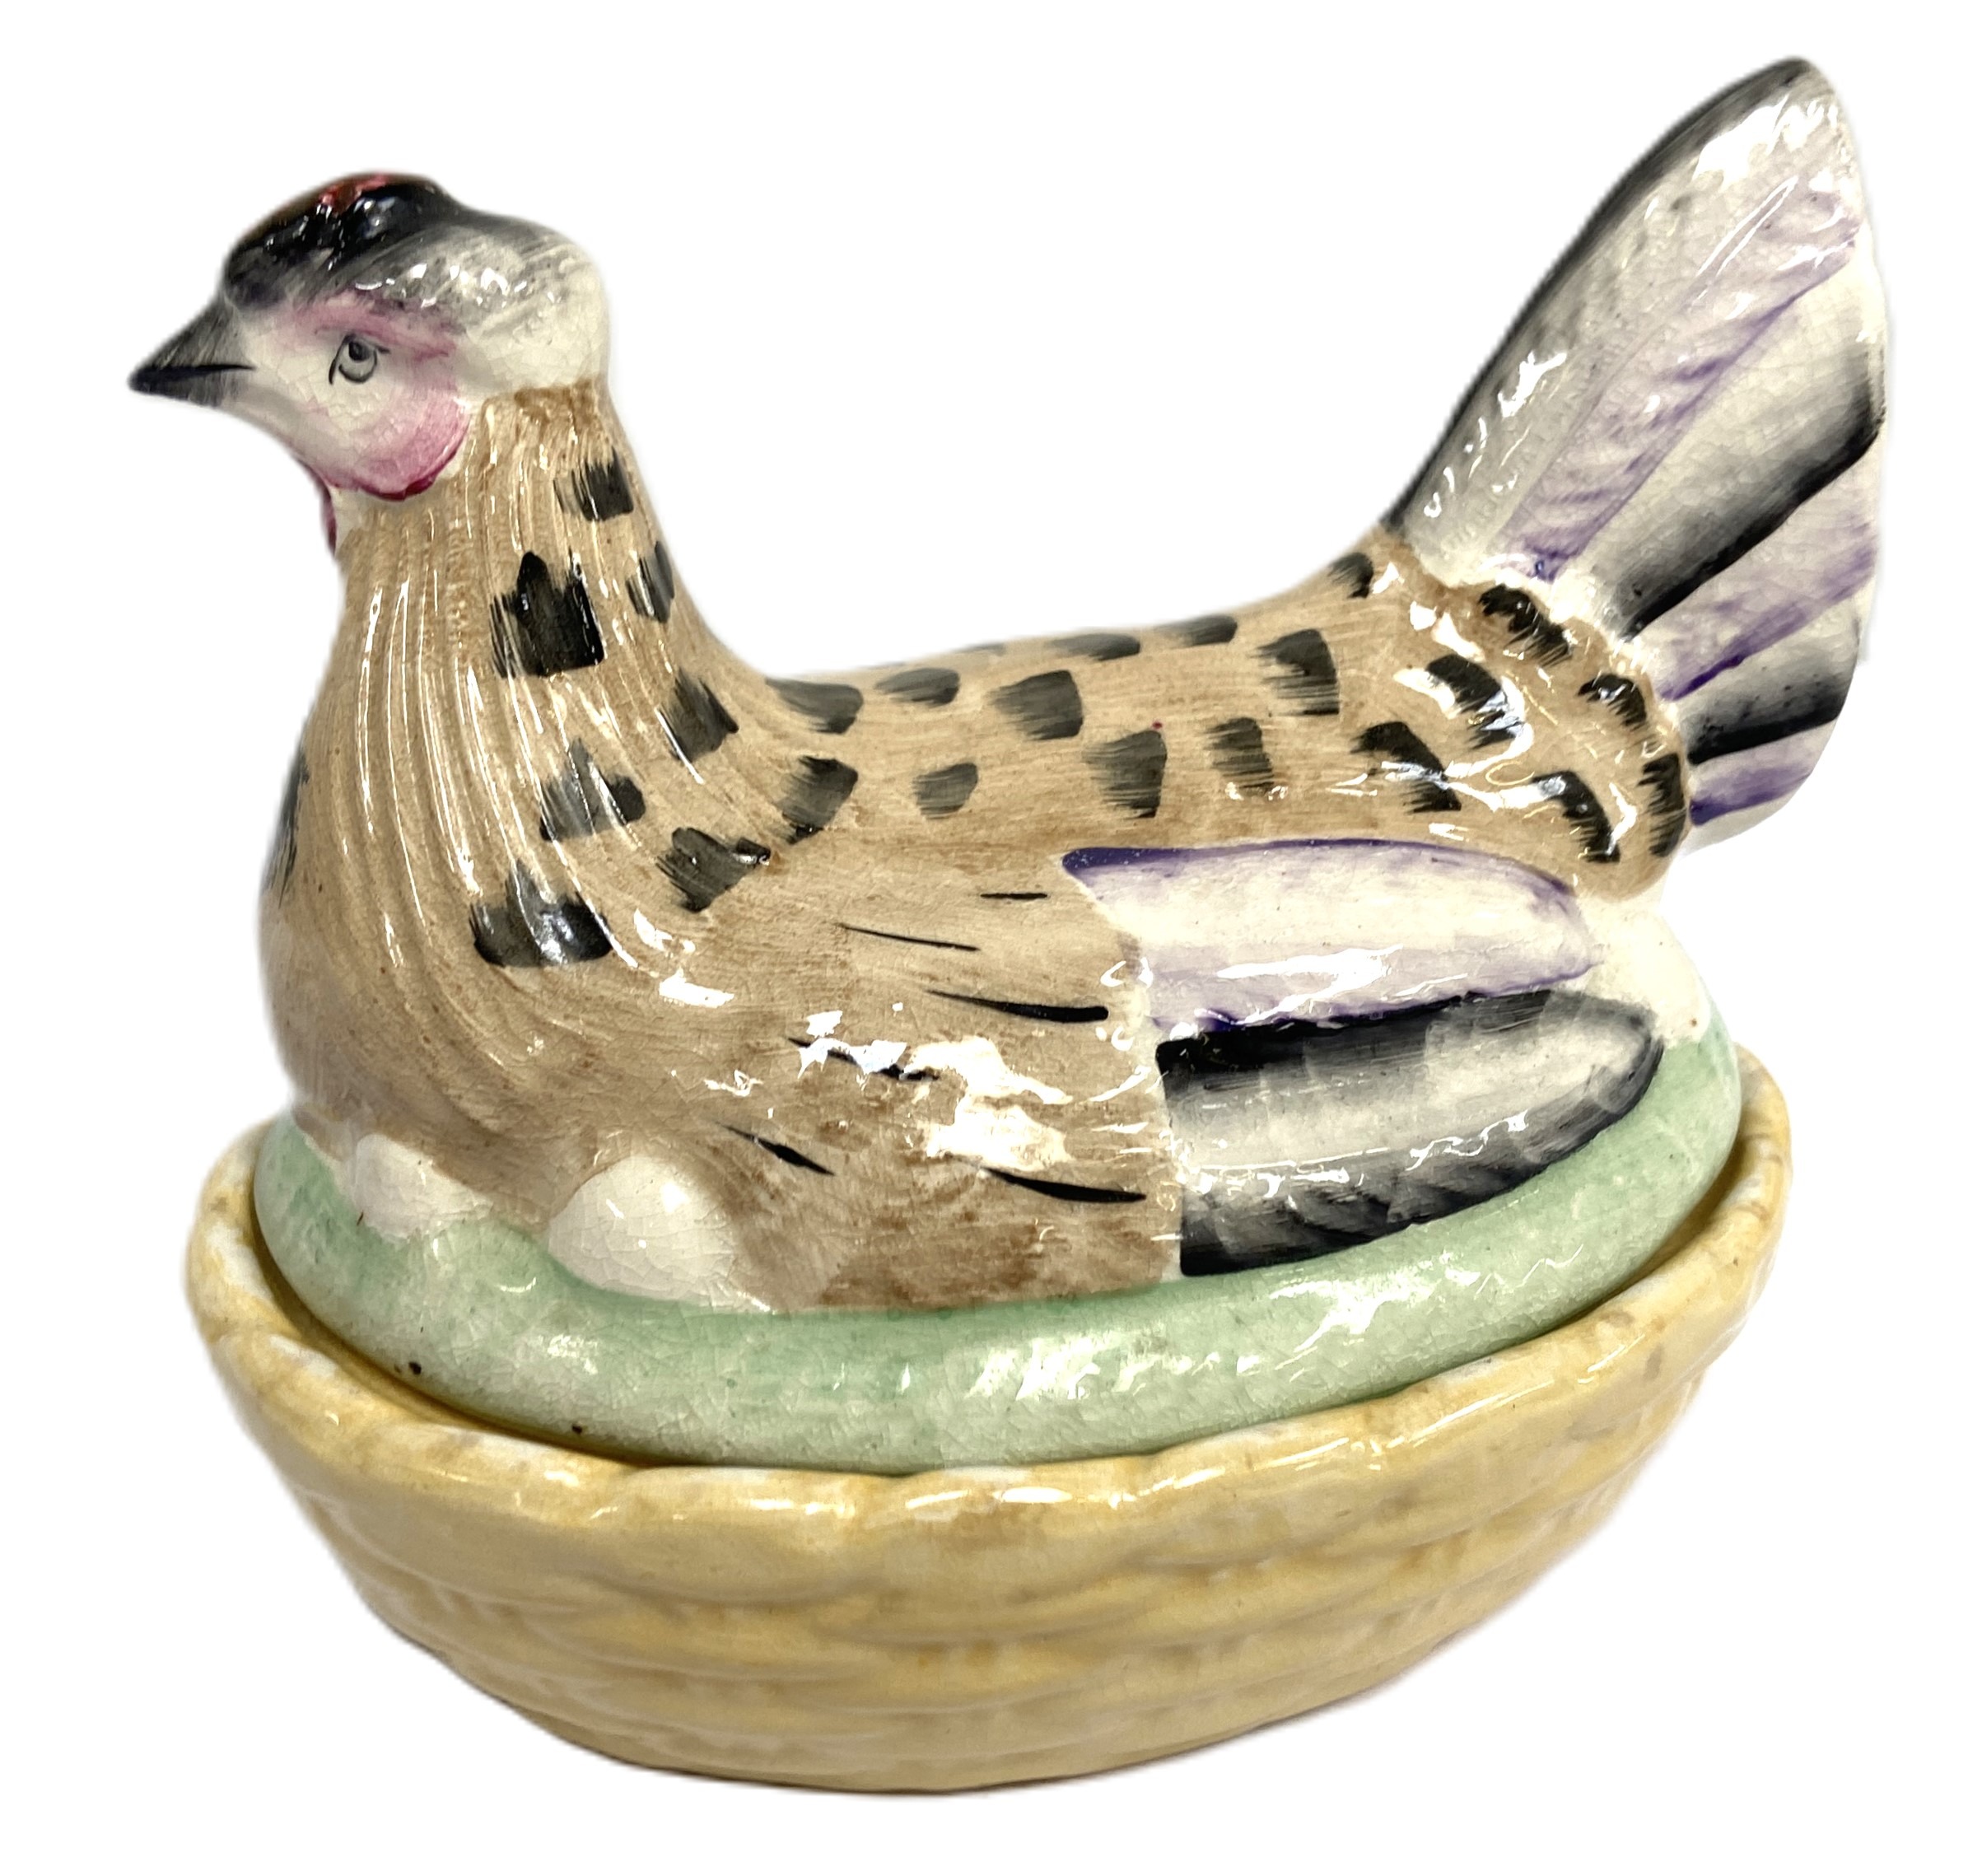 An assortment of ceramics, including a pottery chicken dish, a decorative glass dump, two mugs